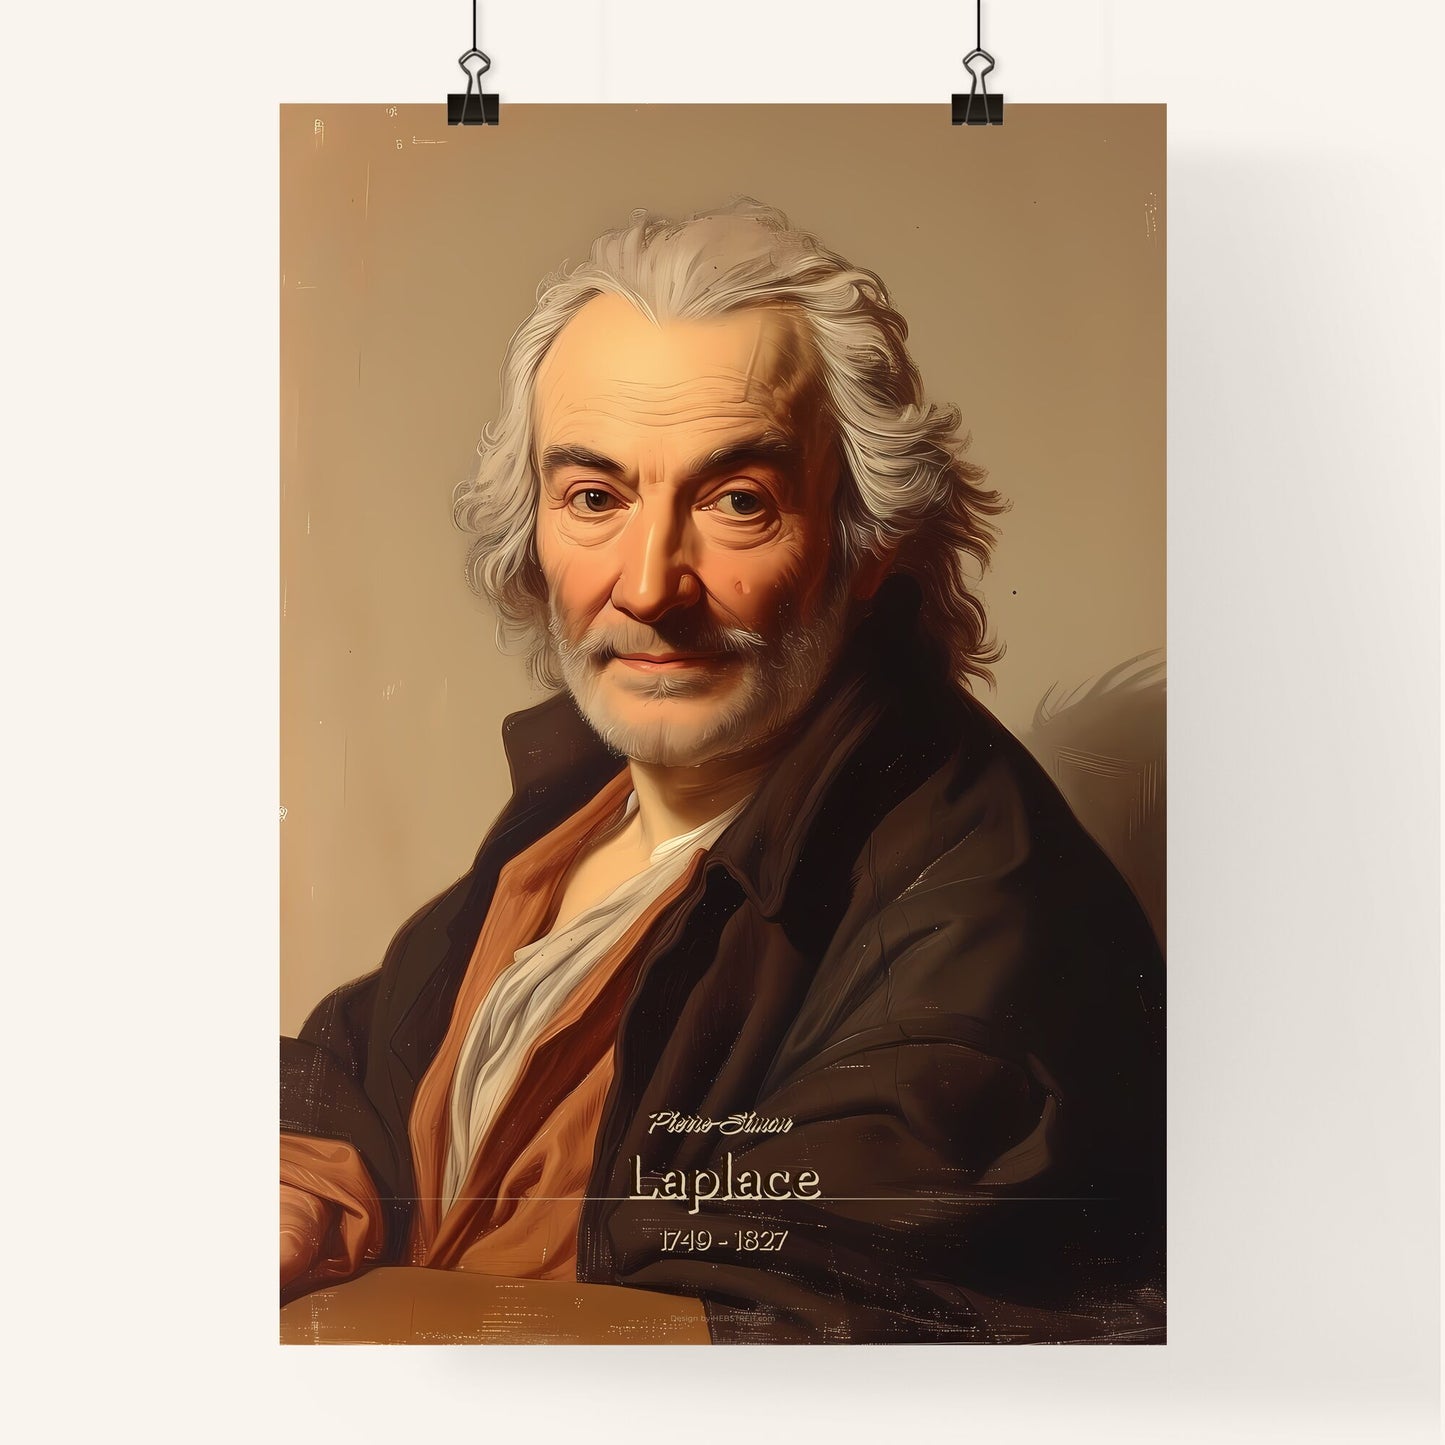 Pierre-Simon, Laplace, 1749 - 1827, A Poster of a man with white hair and beard Default Title